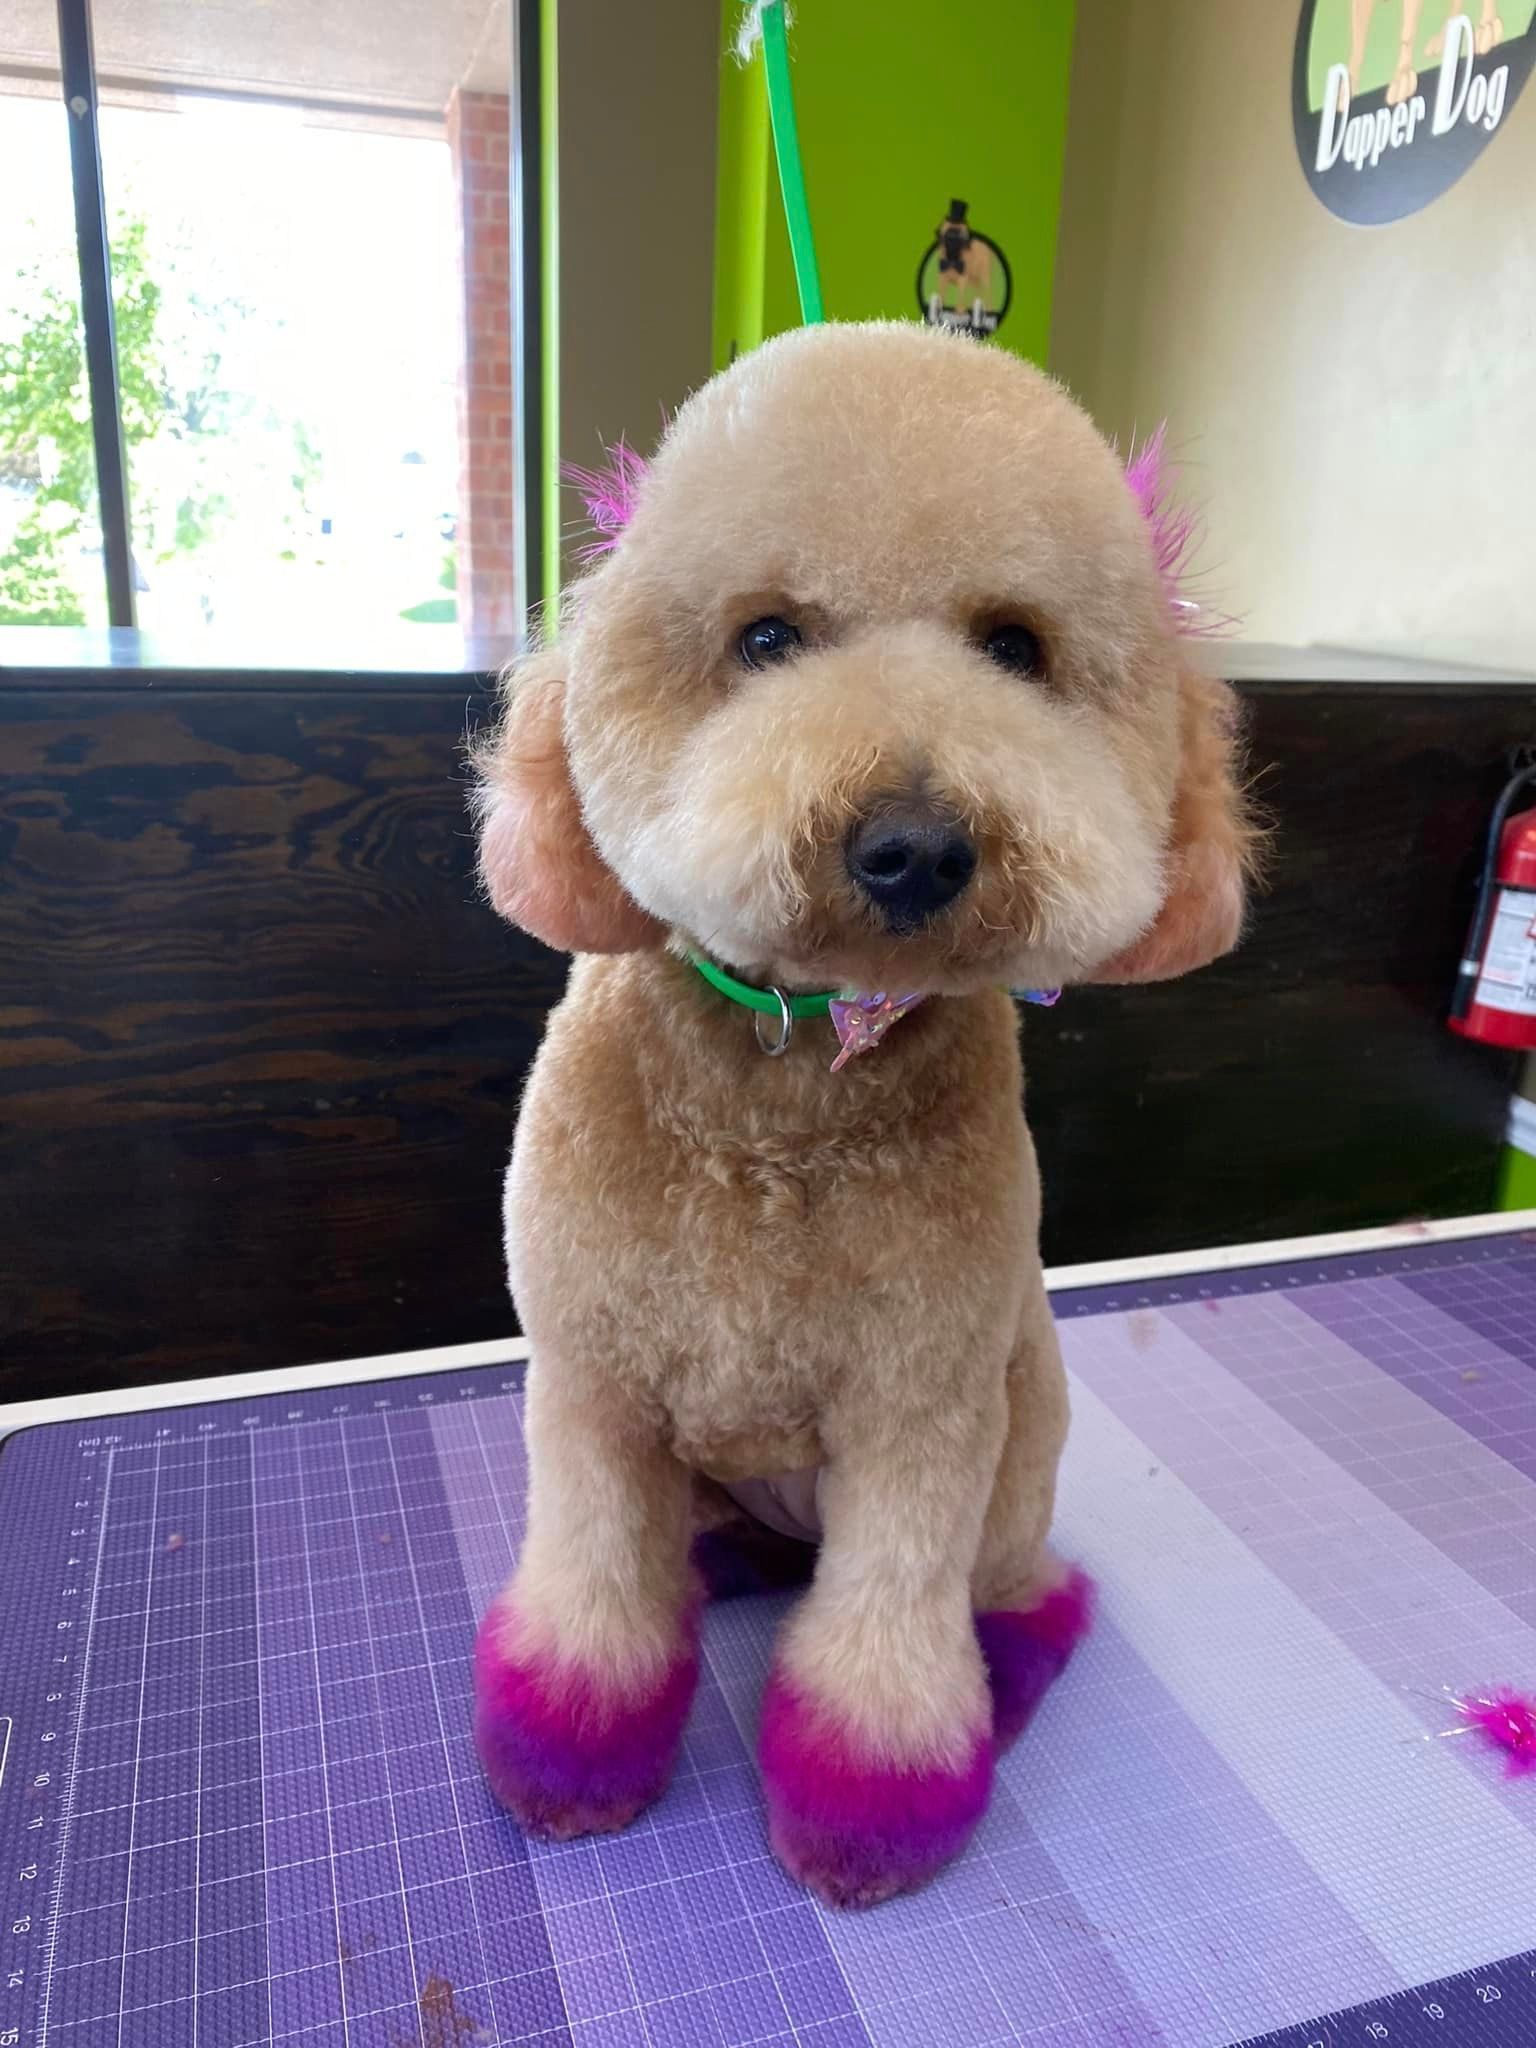 A small brown dog with pink paws is sitting on a table.